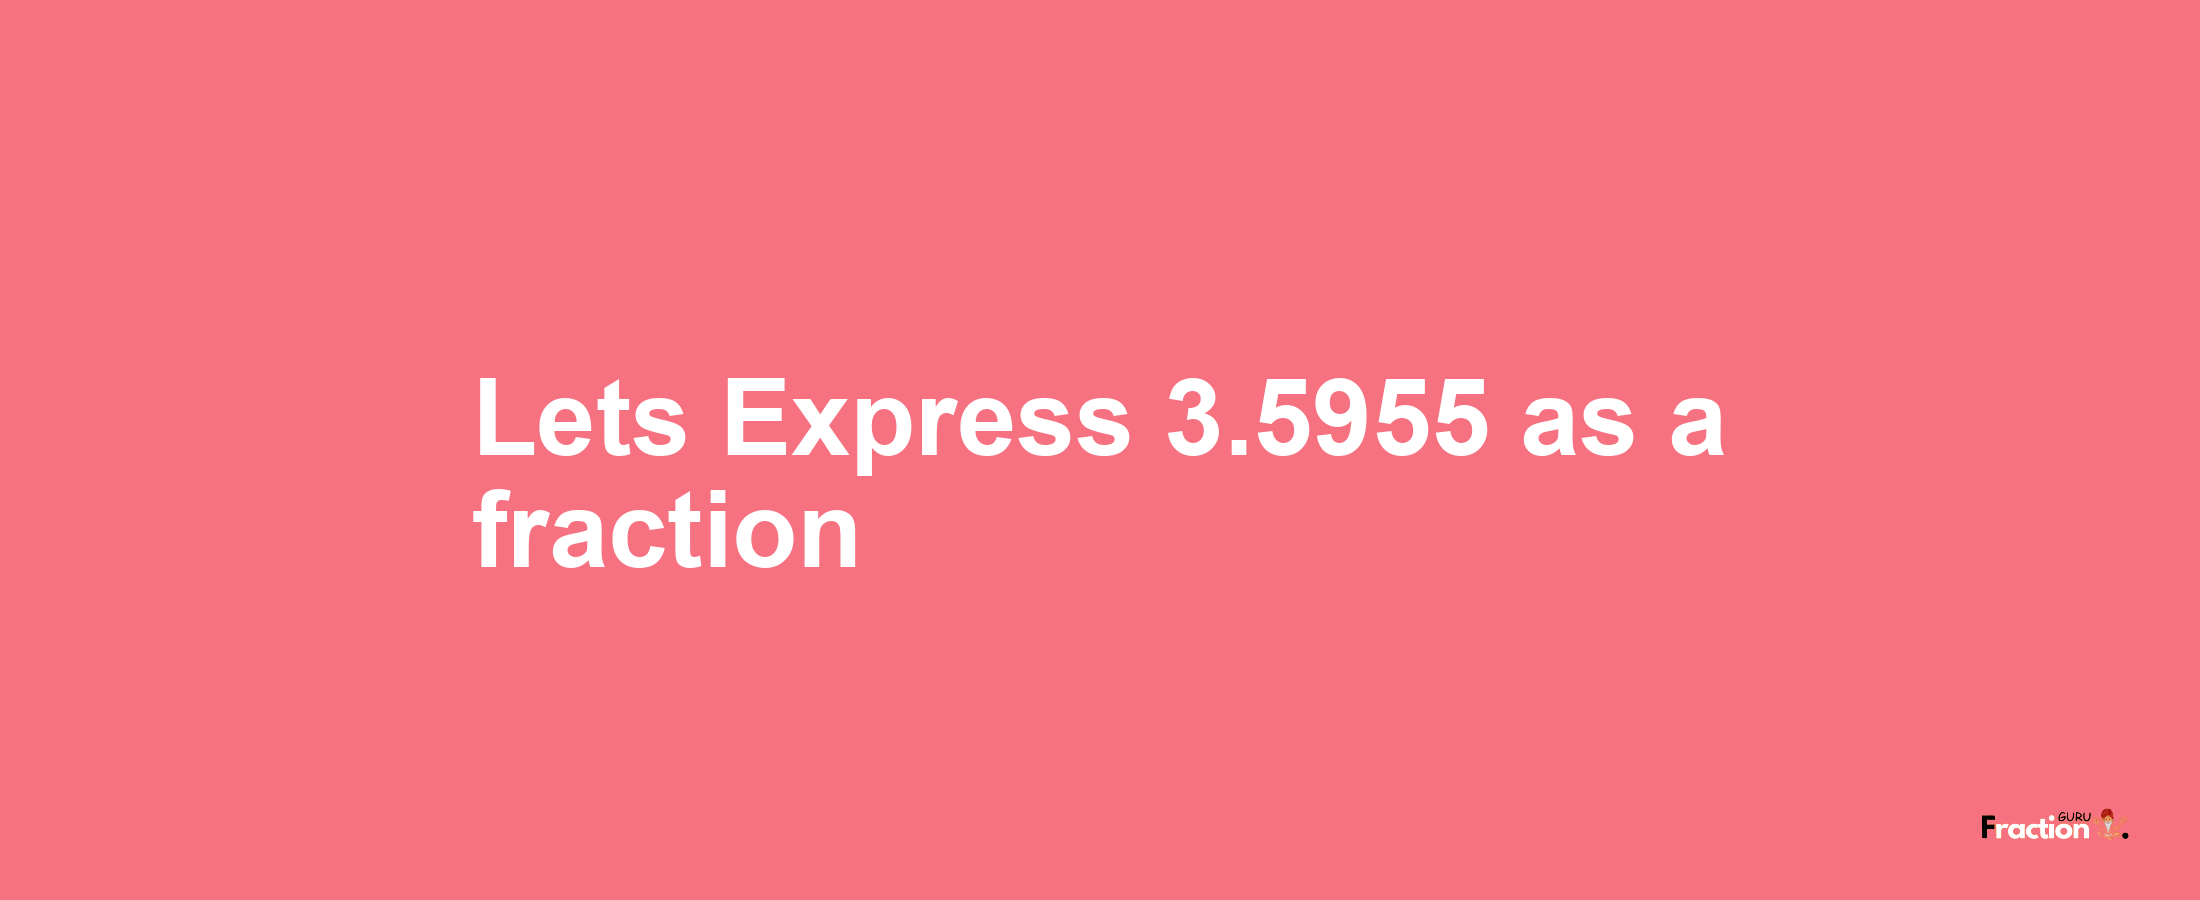 Lets Express 3.5955 as afraction